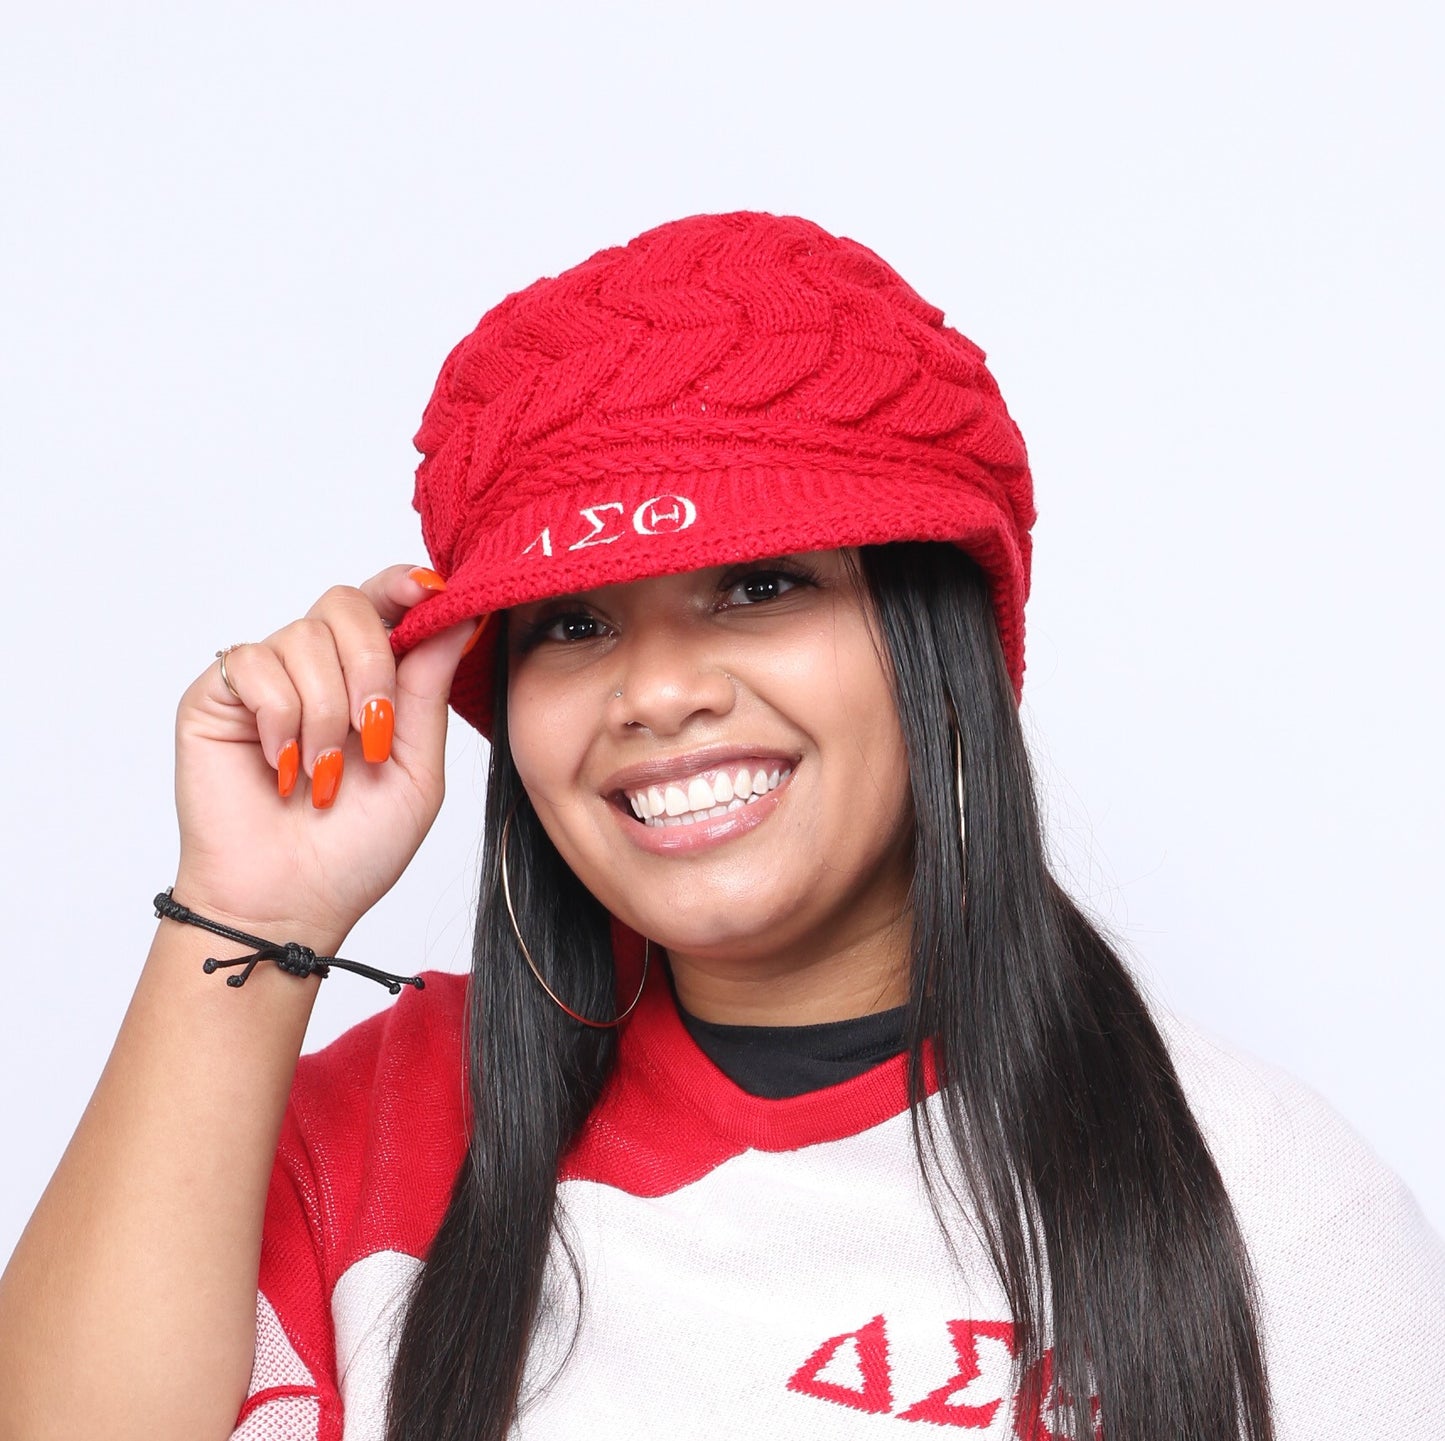 Delta Sigma Theta (ΔΣΘ) Sorority Red color Acrylic woolen Cap/Winter hat with Greek letters on it, Reusable & Washable.